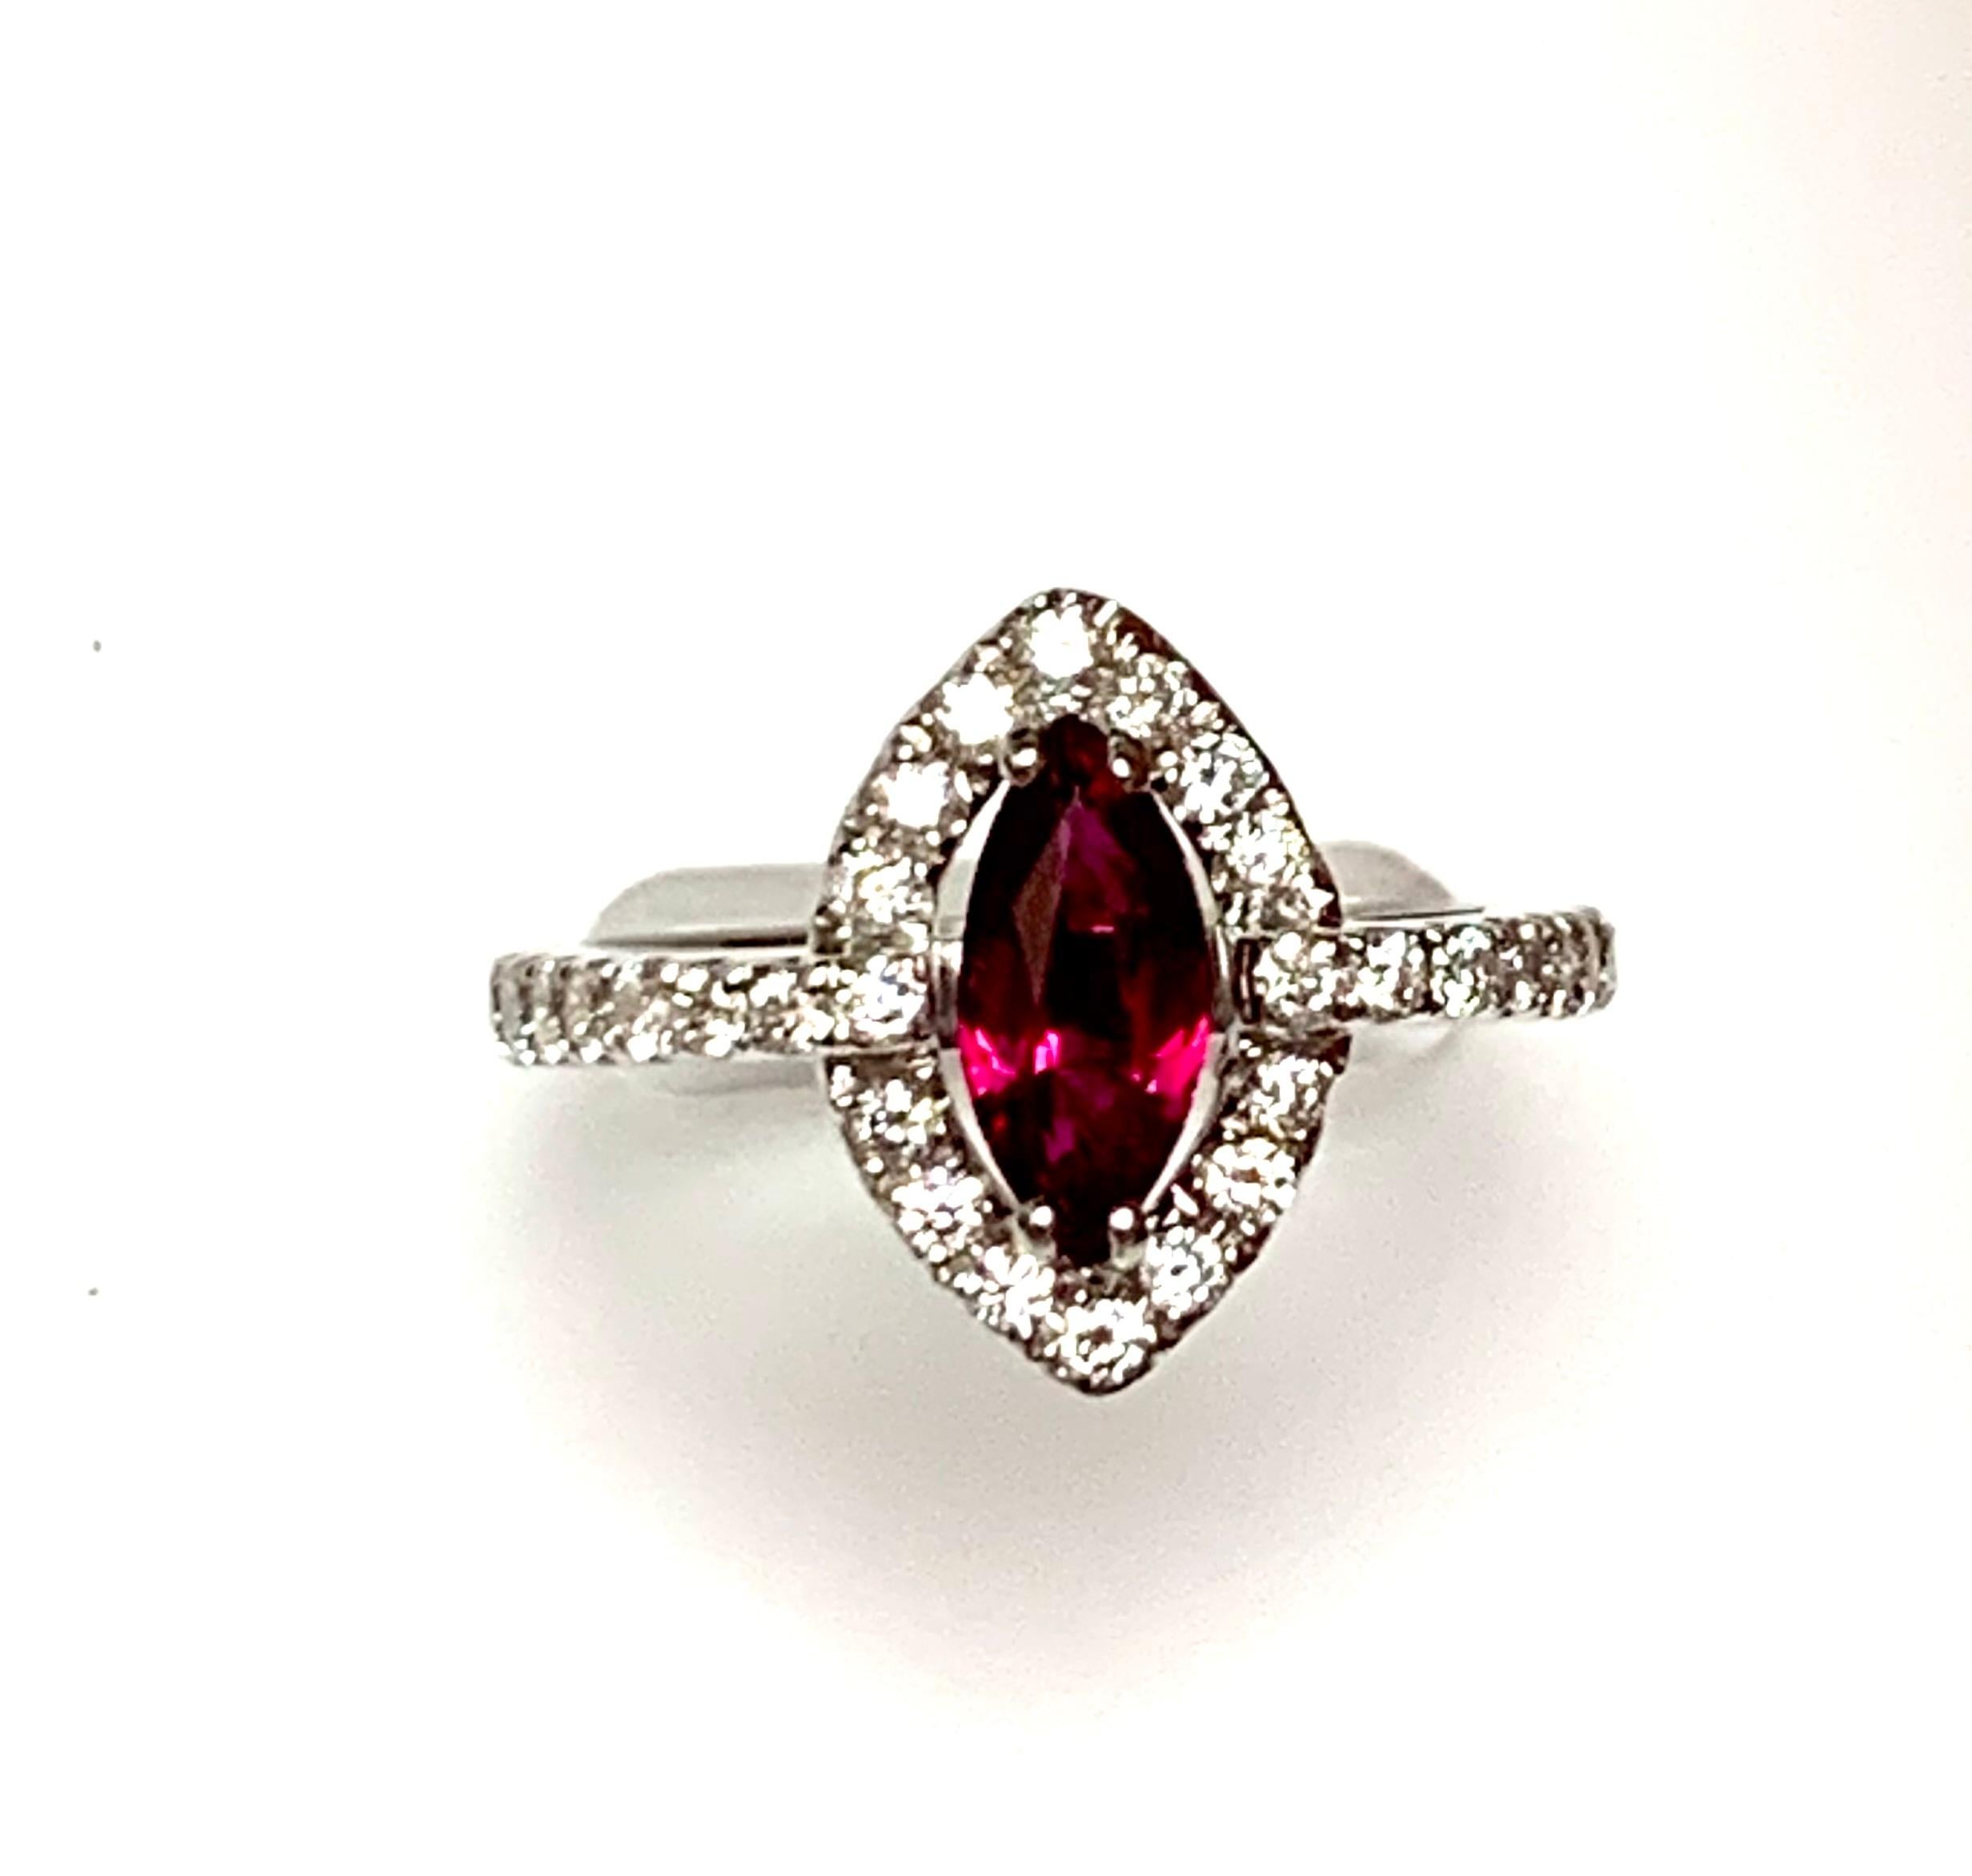 1.01 Carat Marquise shape Natural no heat ruby set in 18k white gold rinf surronded with 0.55 ct diamonds around and half way on the shank.